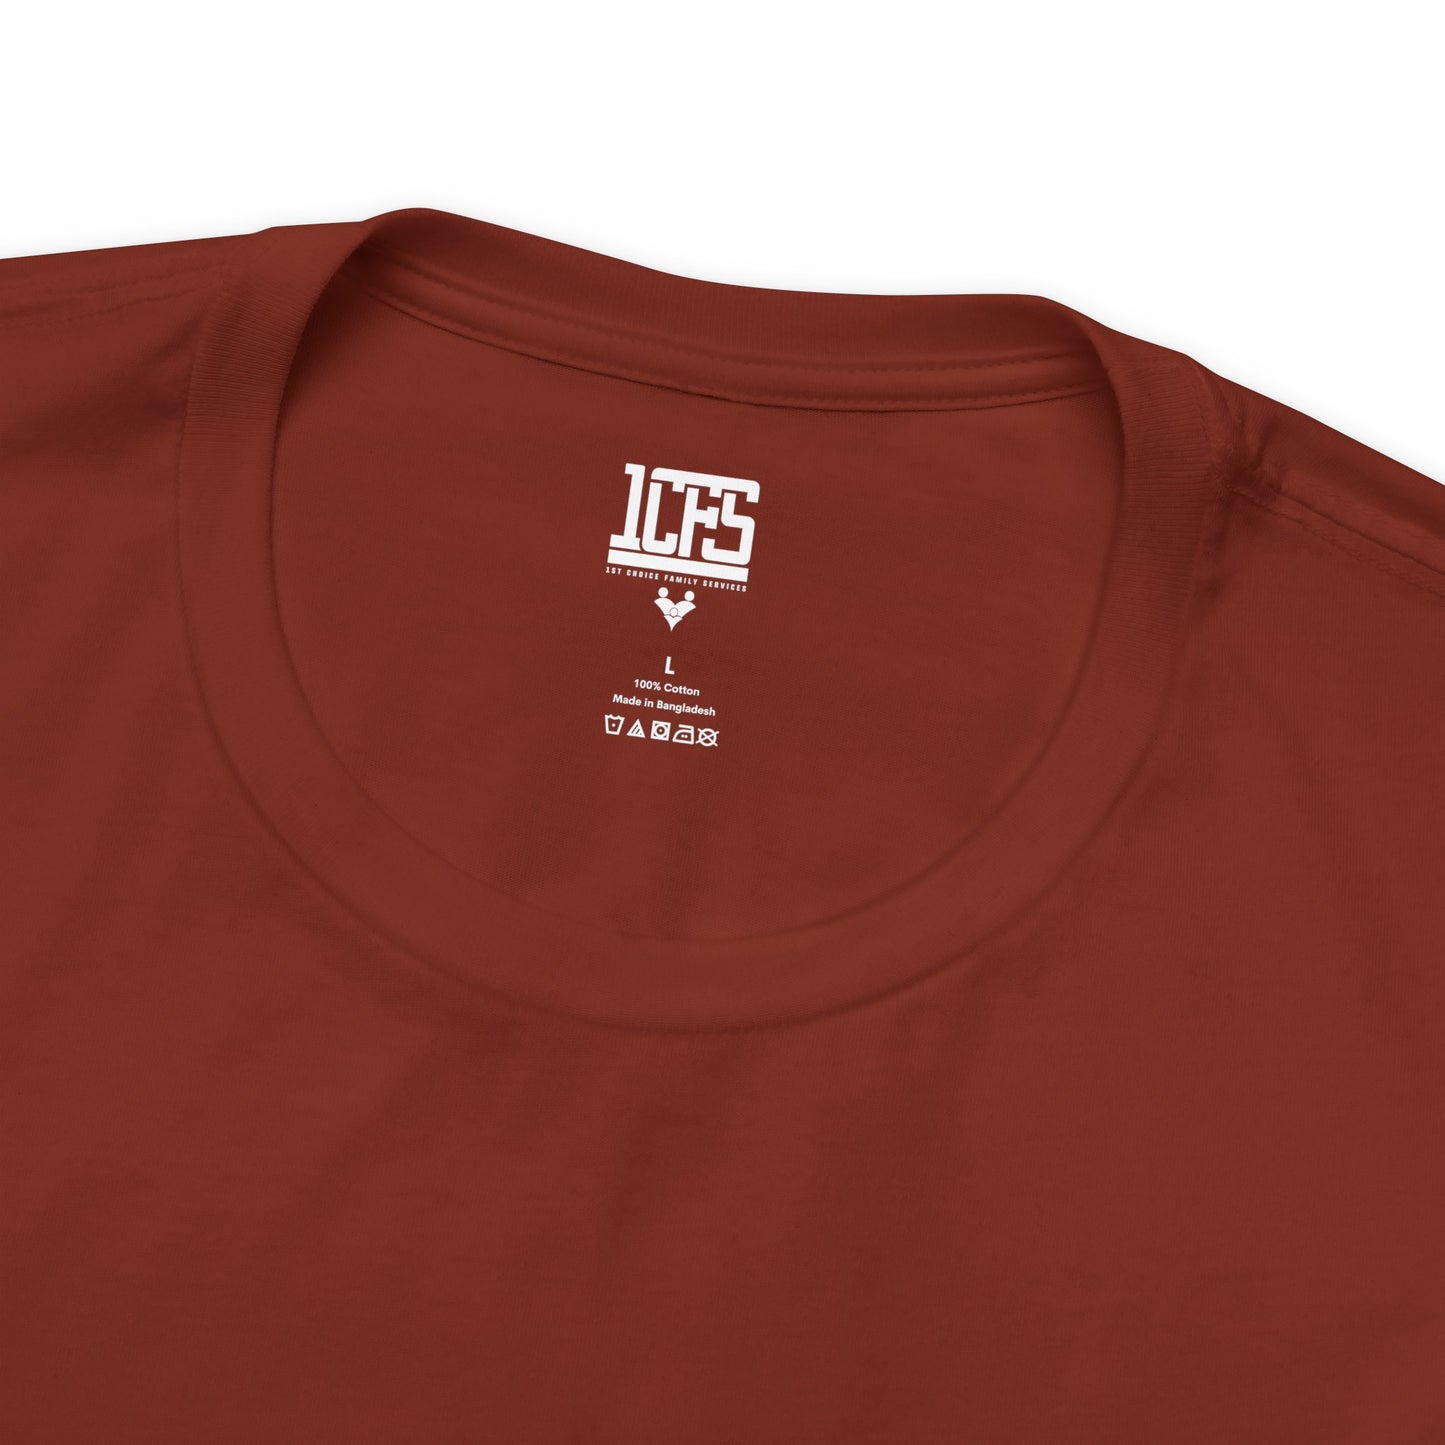 Let's Do The Shift Tee Rust